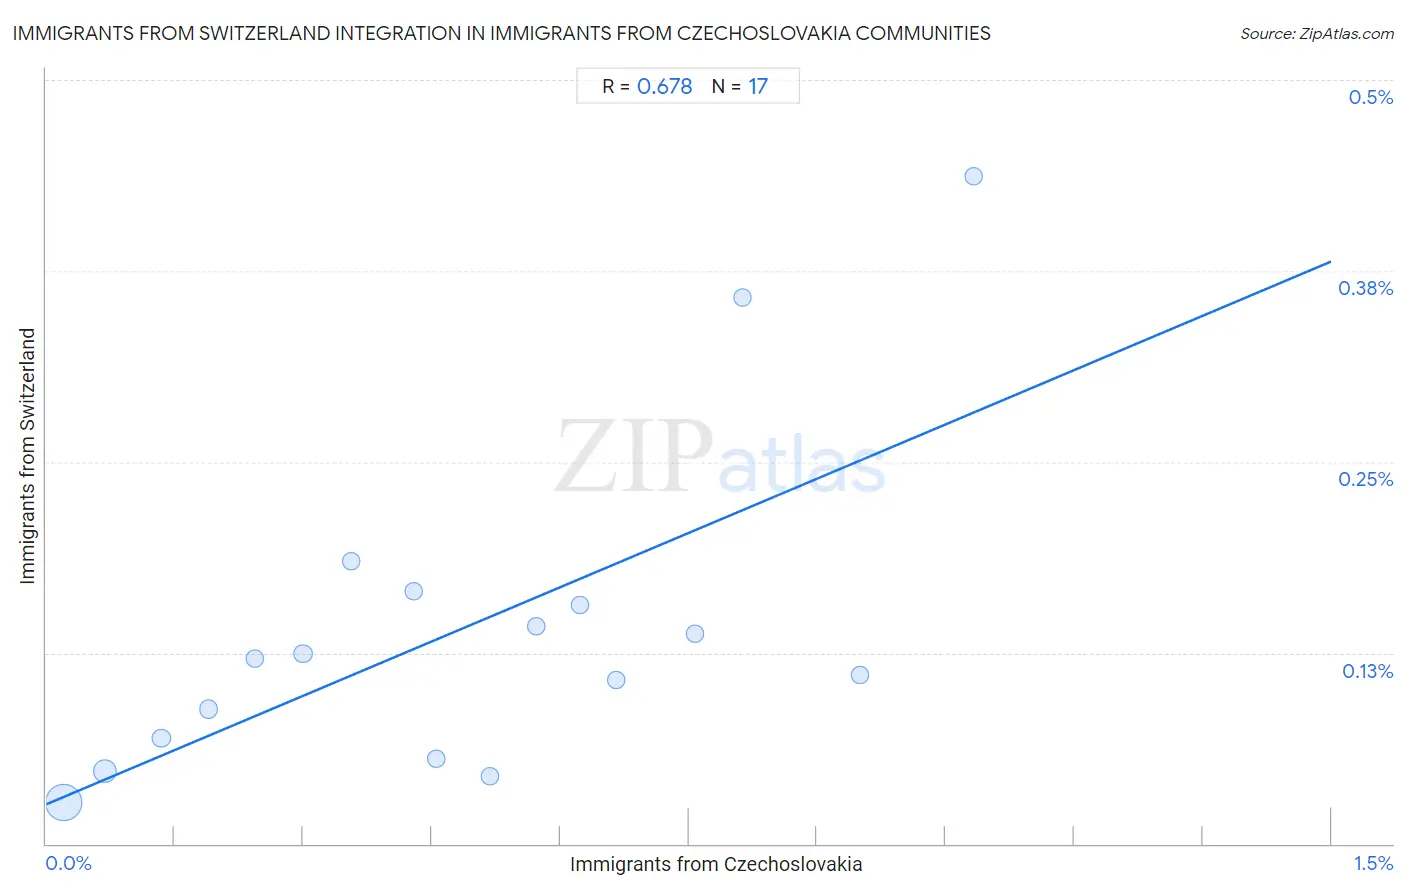 Immigrants from Czechoslovakia Integration in Immigrants from Switzerland Communities